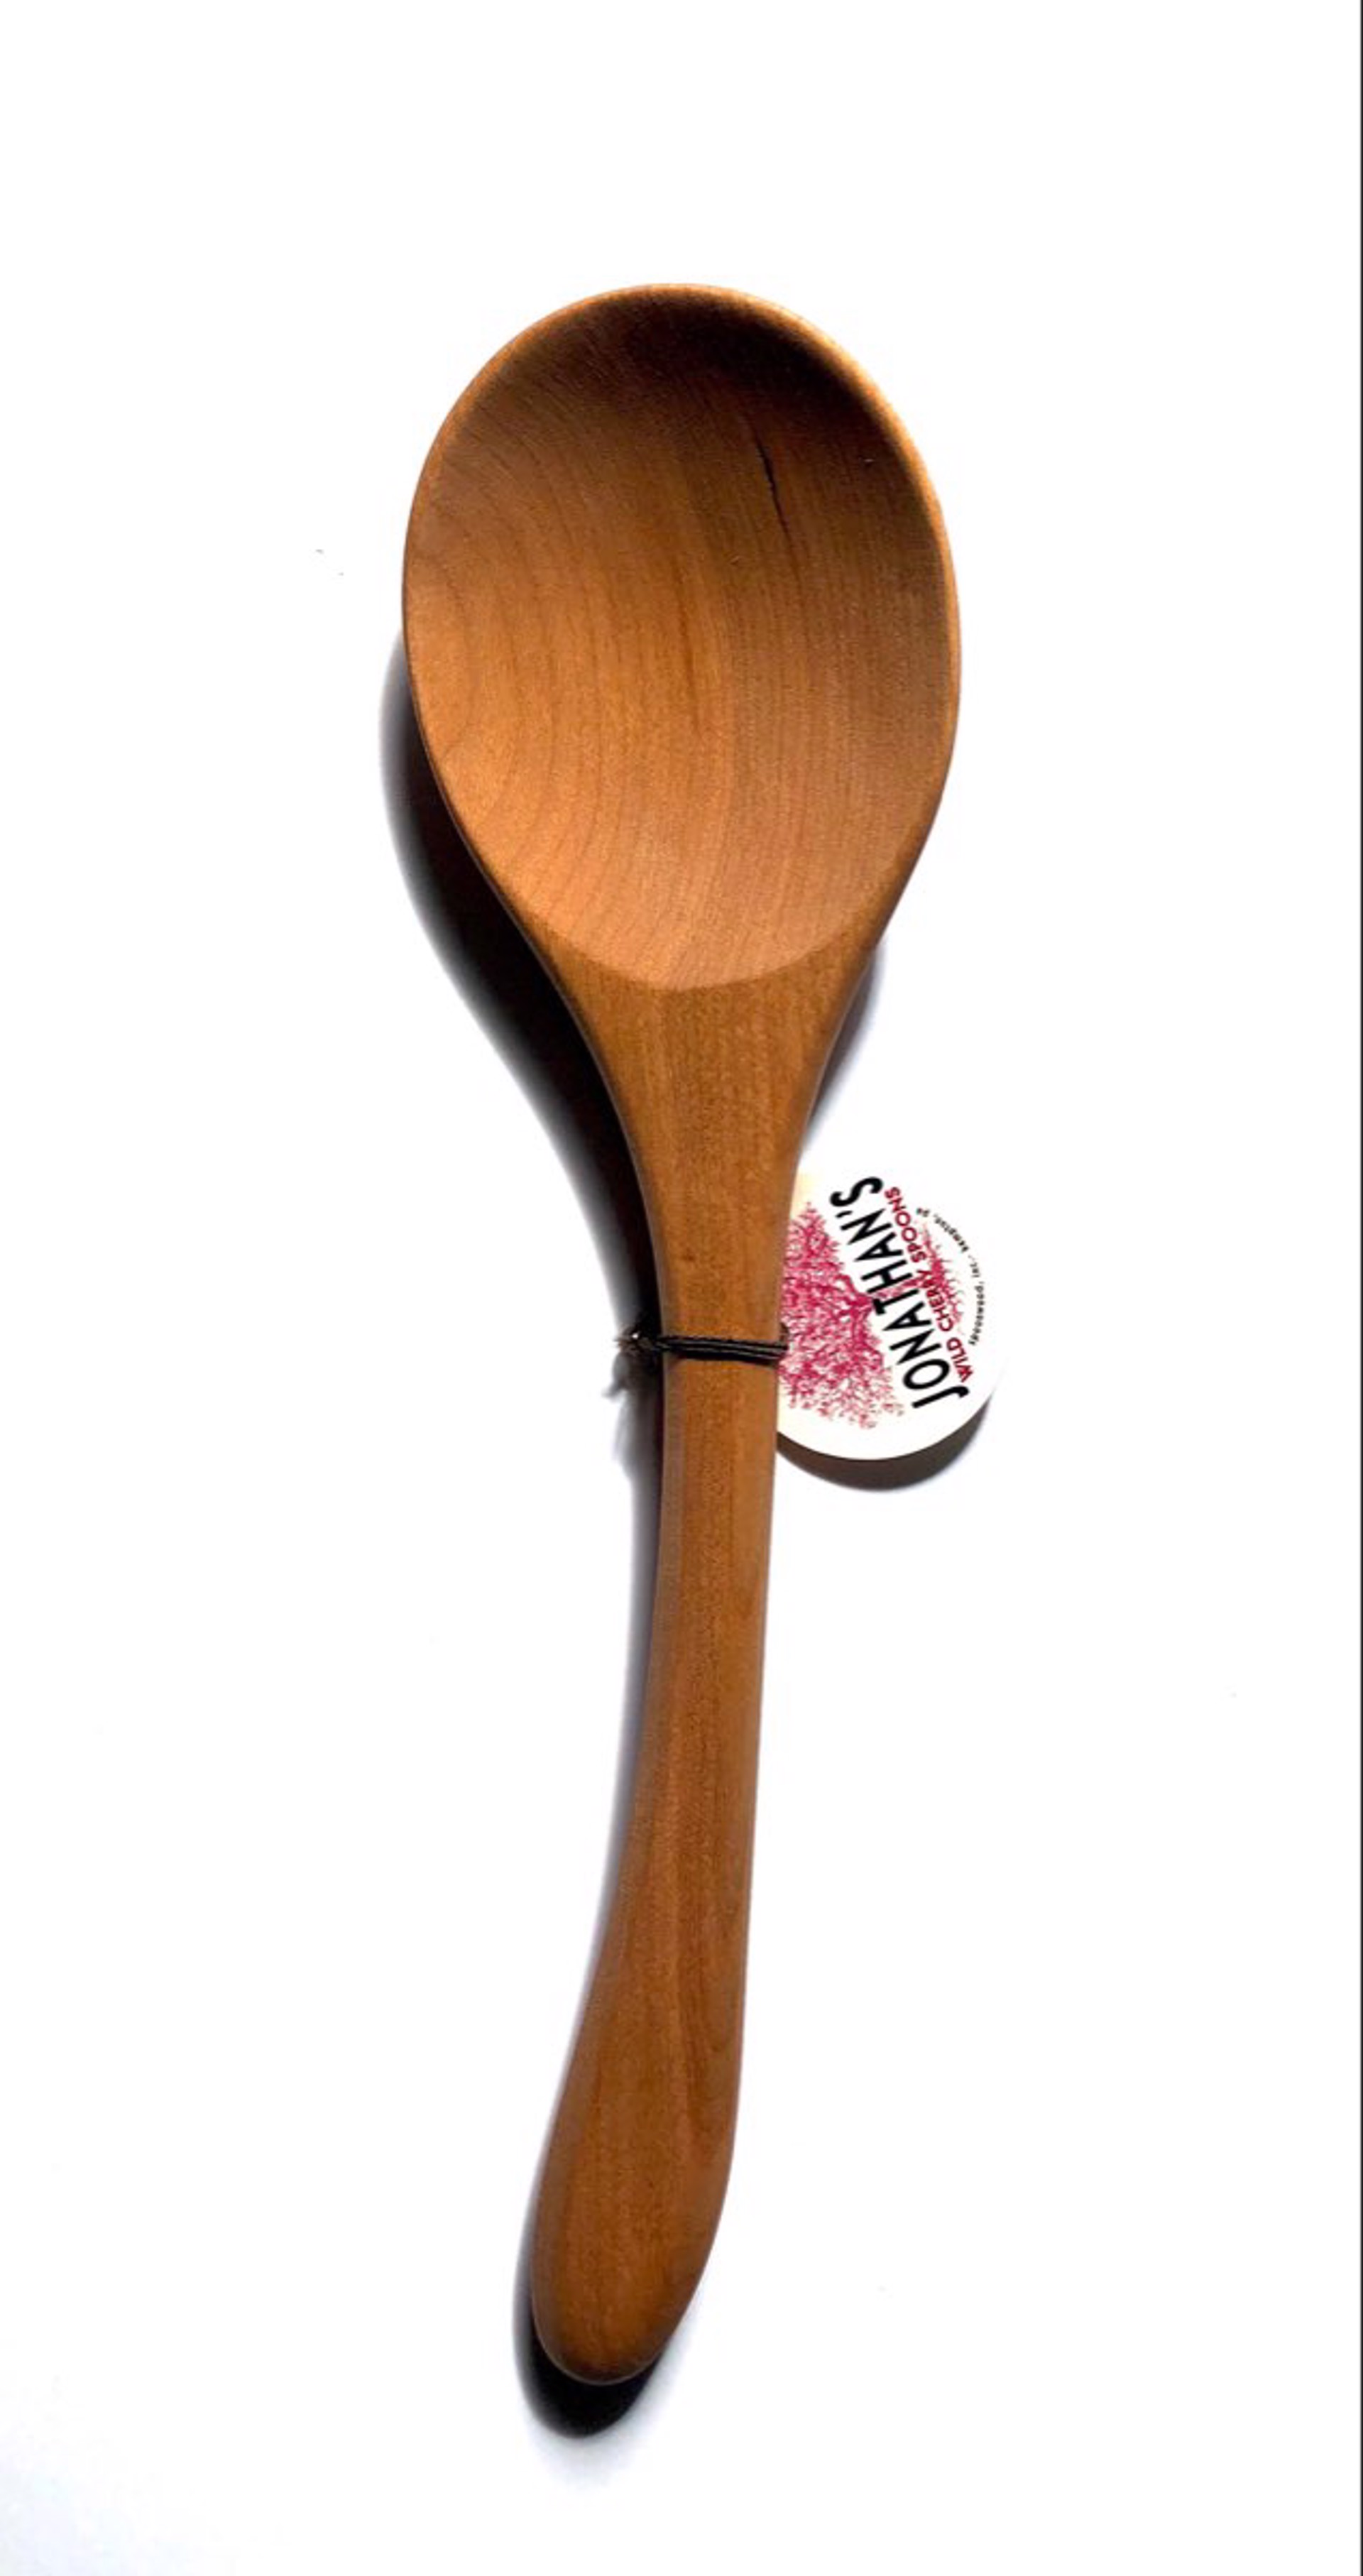 Serving Spoon by Jonathan's Spoons